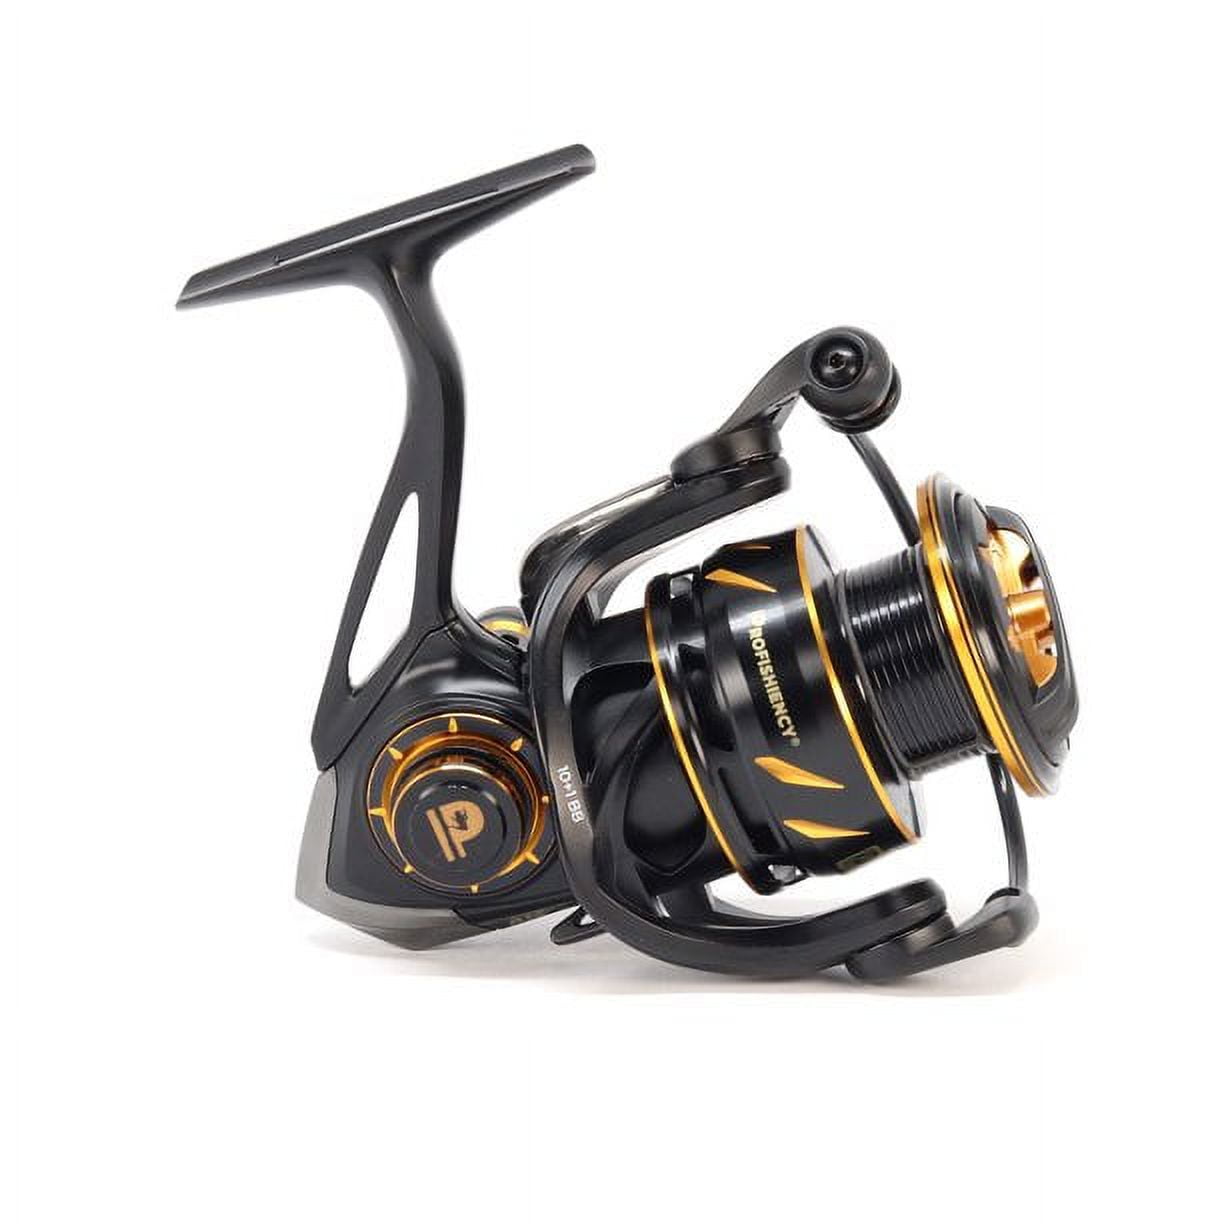 ProFISHiency A12 2000 Series Black and Gold Magnesium Spinning Fishing Reel